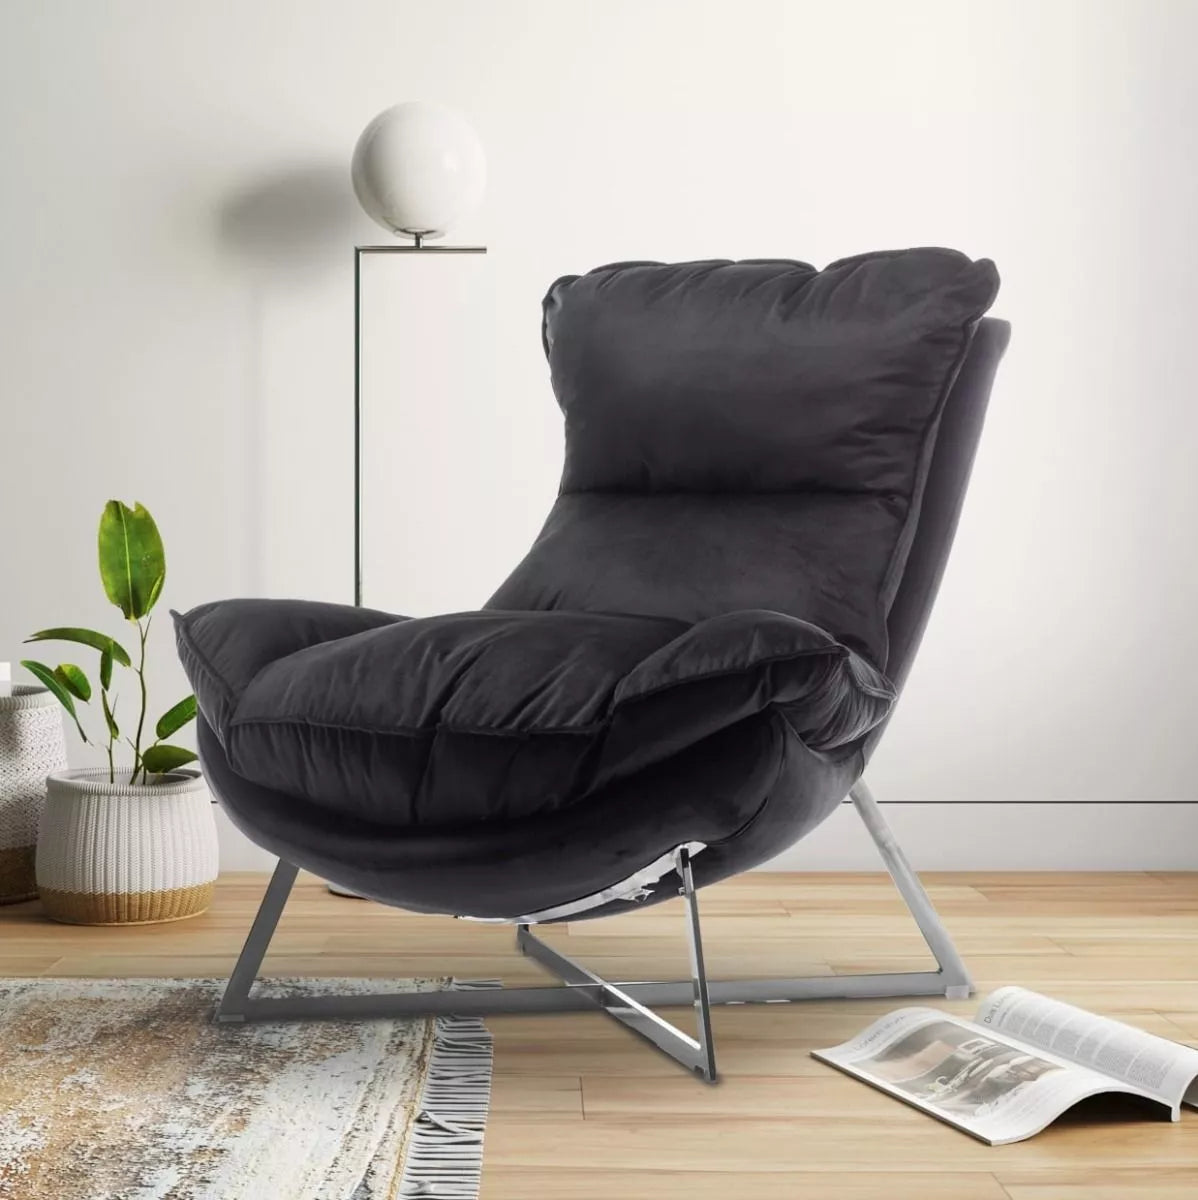 Black velvet accent chair Pierina from Stunning Chairs, on a light background